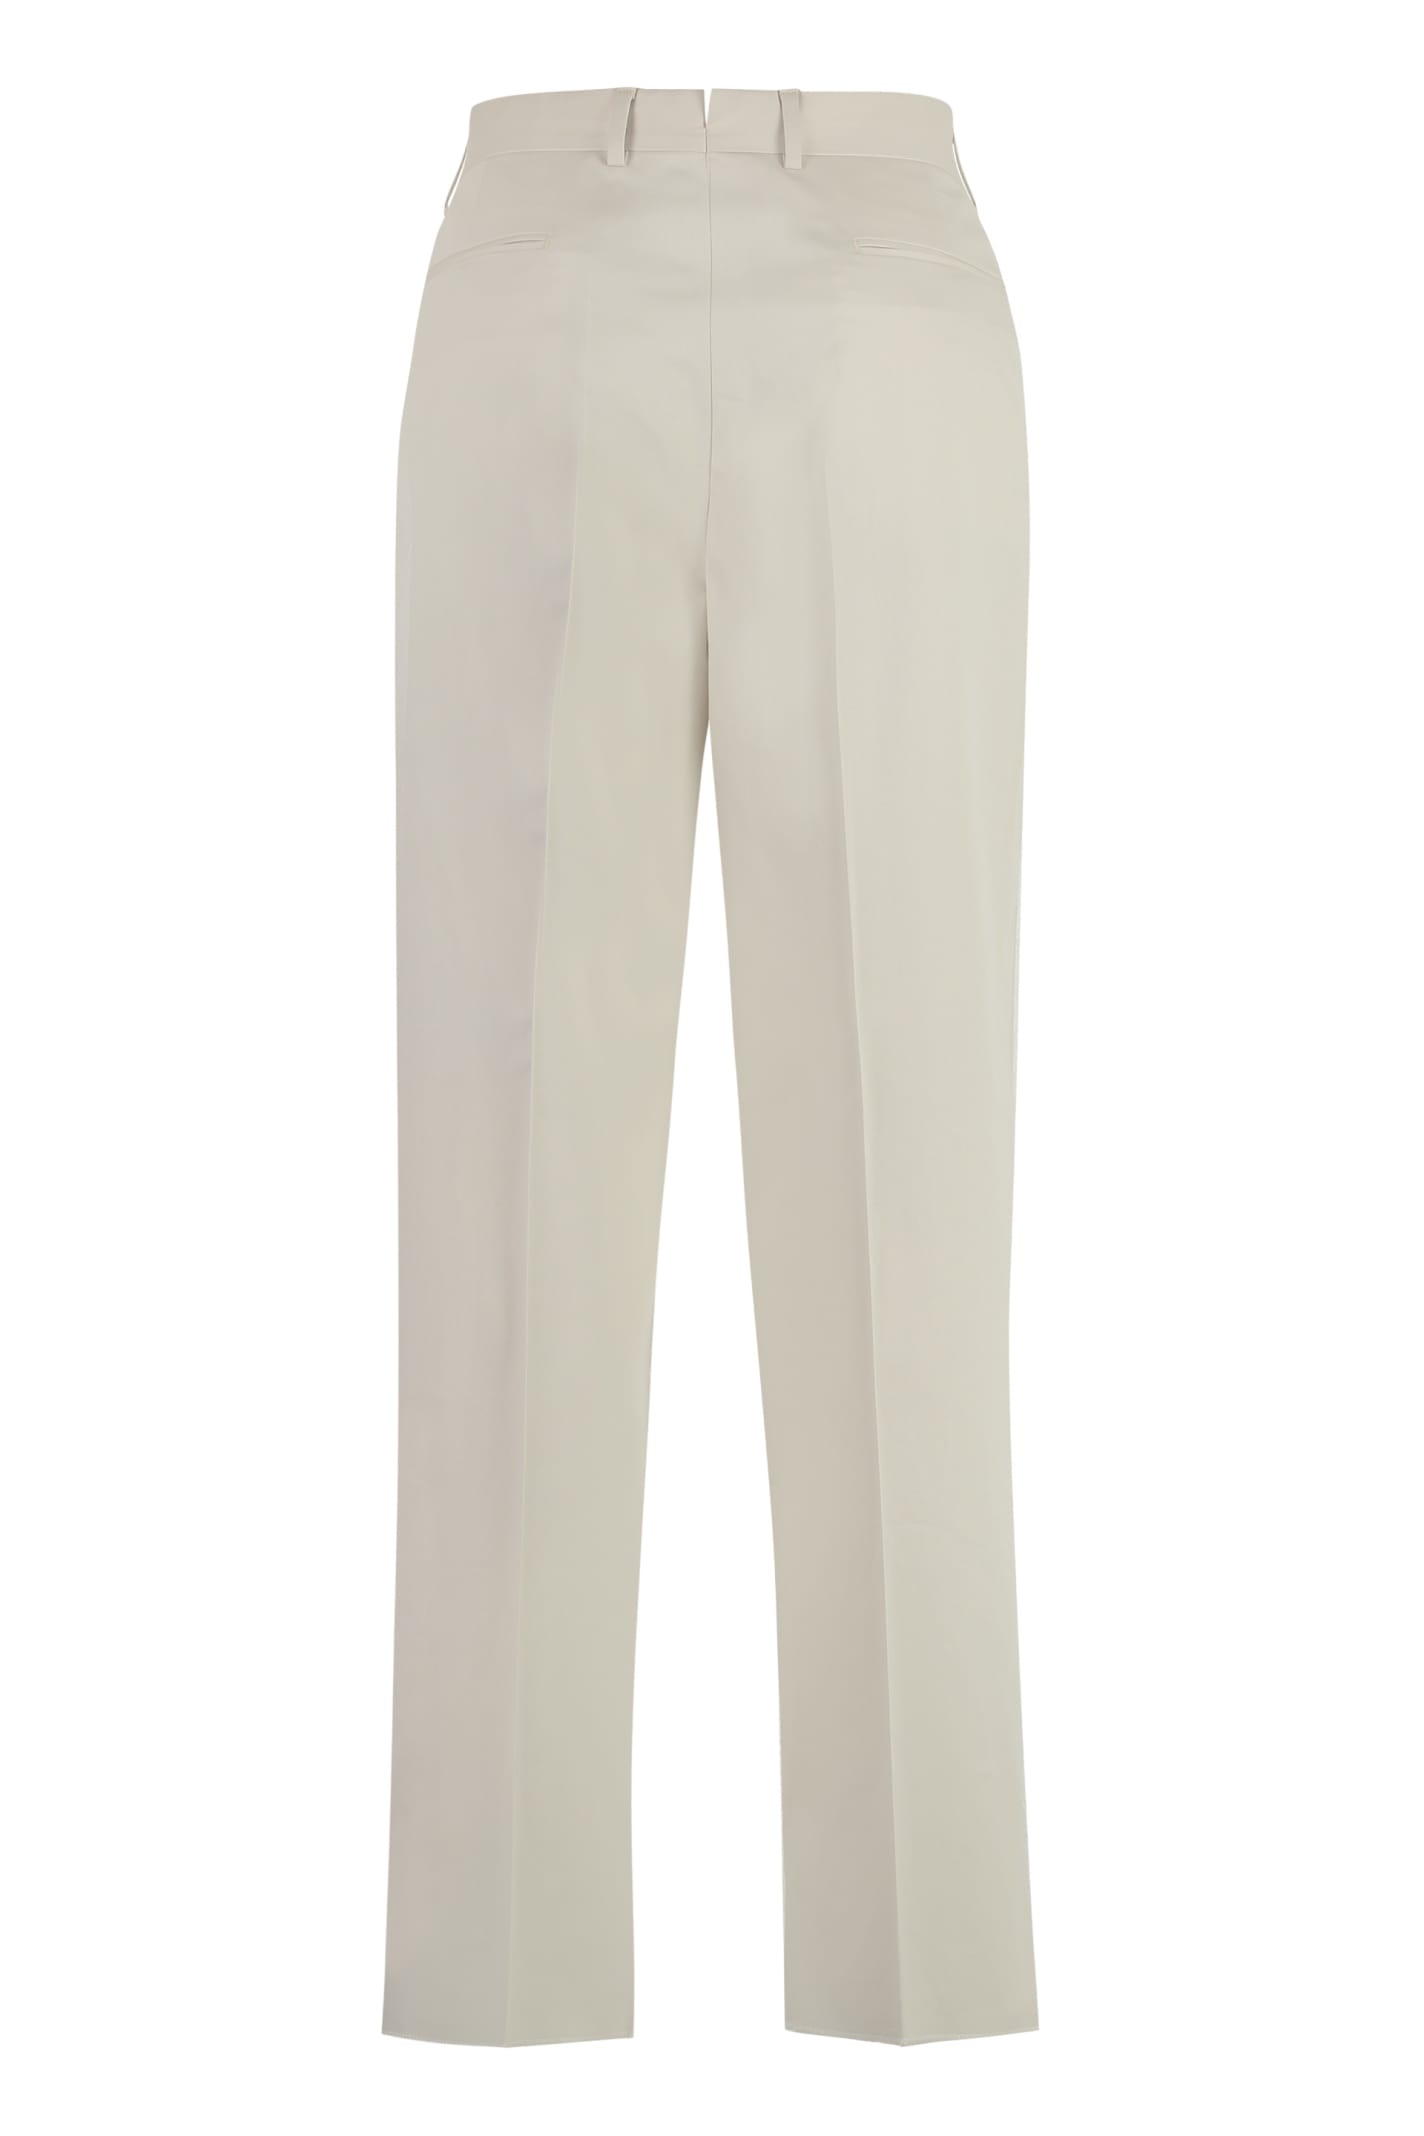 Shop Zegna Stretch Cotton Chino Trousers In Ivory